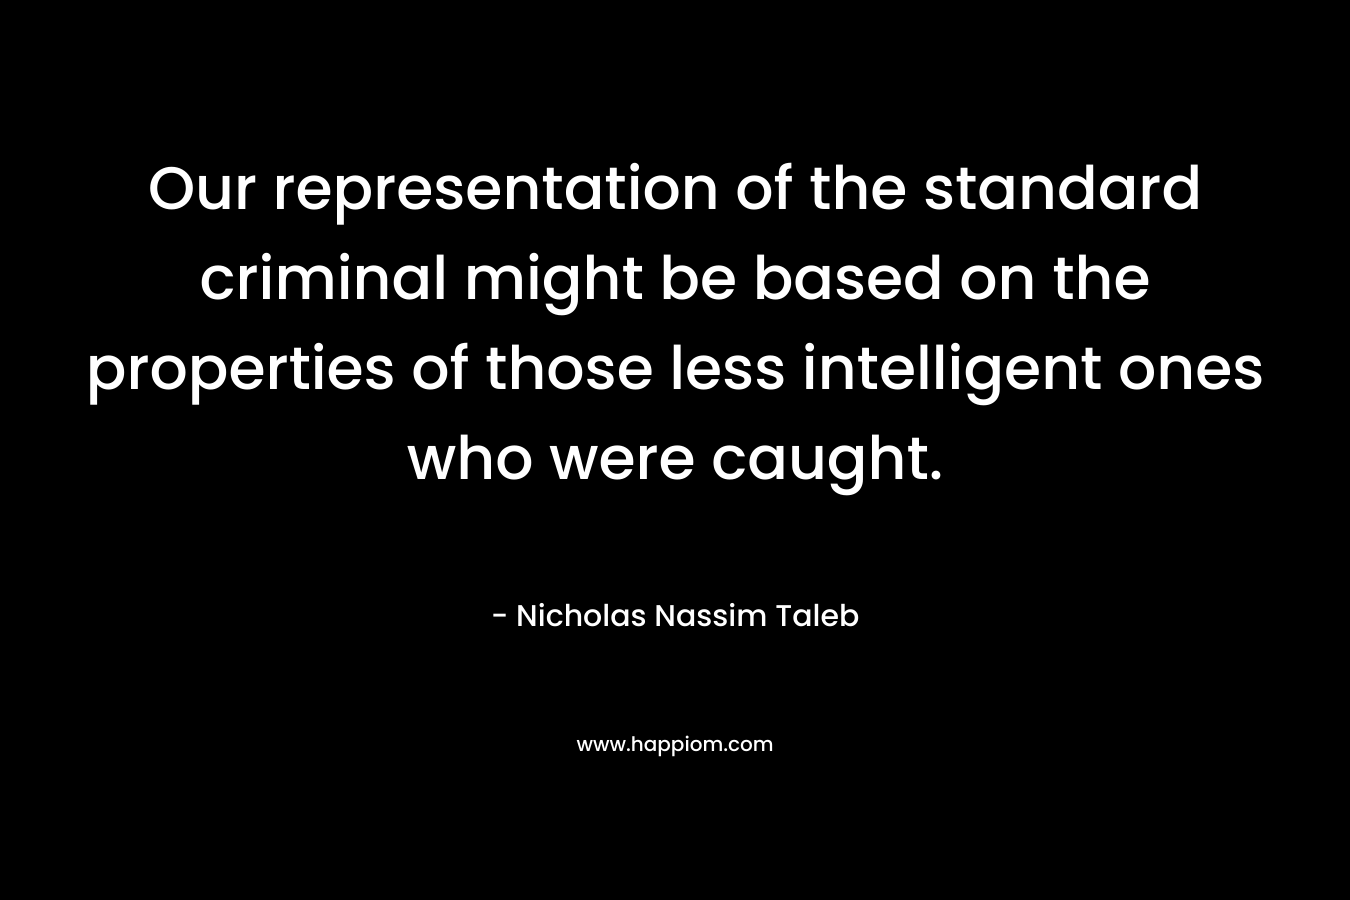 Our representation of the standard criminal might be based on the properties of those less intelligent ones who were caught. – Nicholas Nassim Taleb